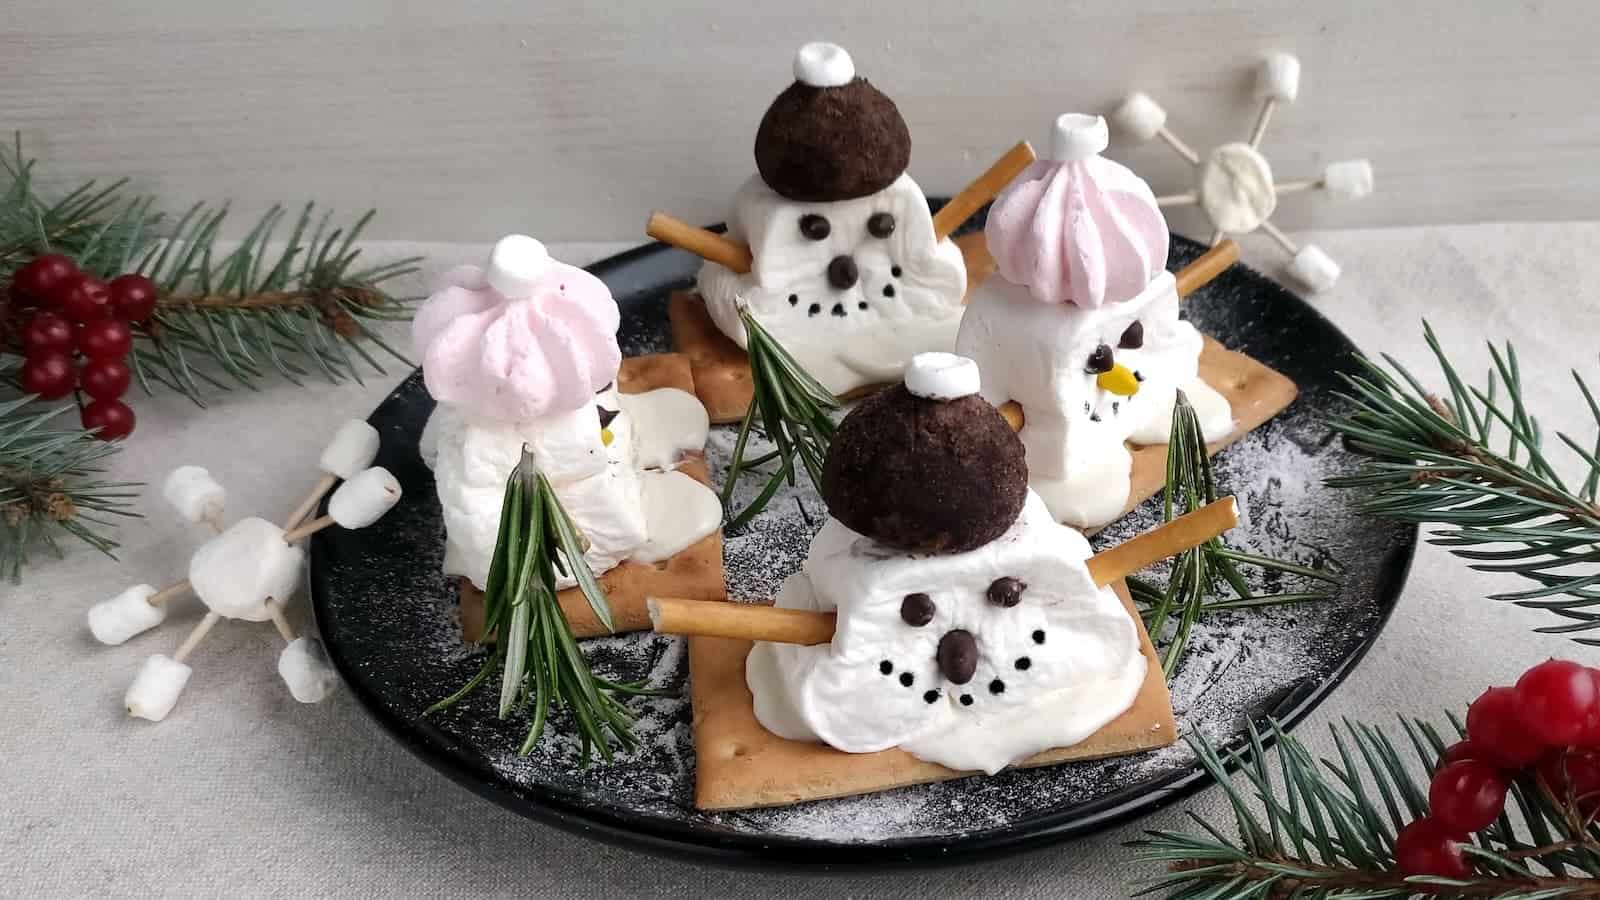 A plate of melting snowman marshmallows and rosemary trees.